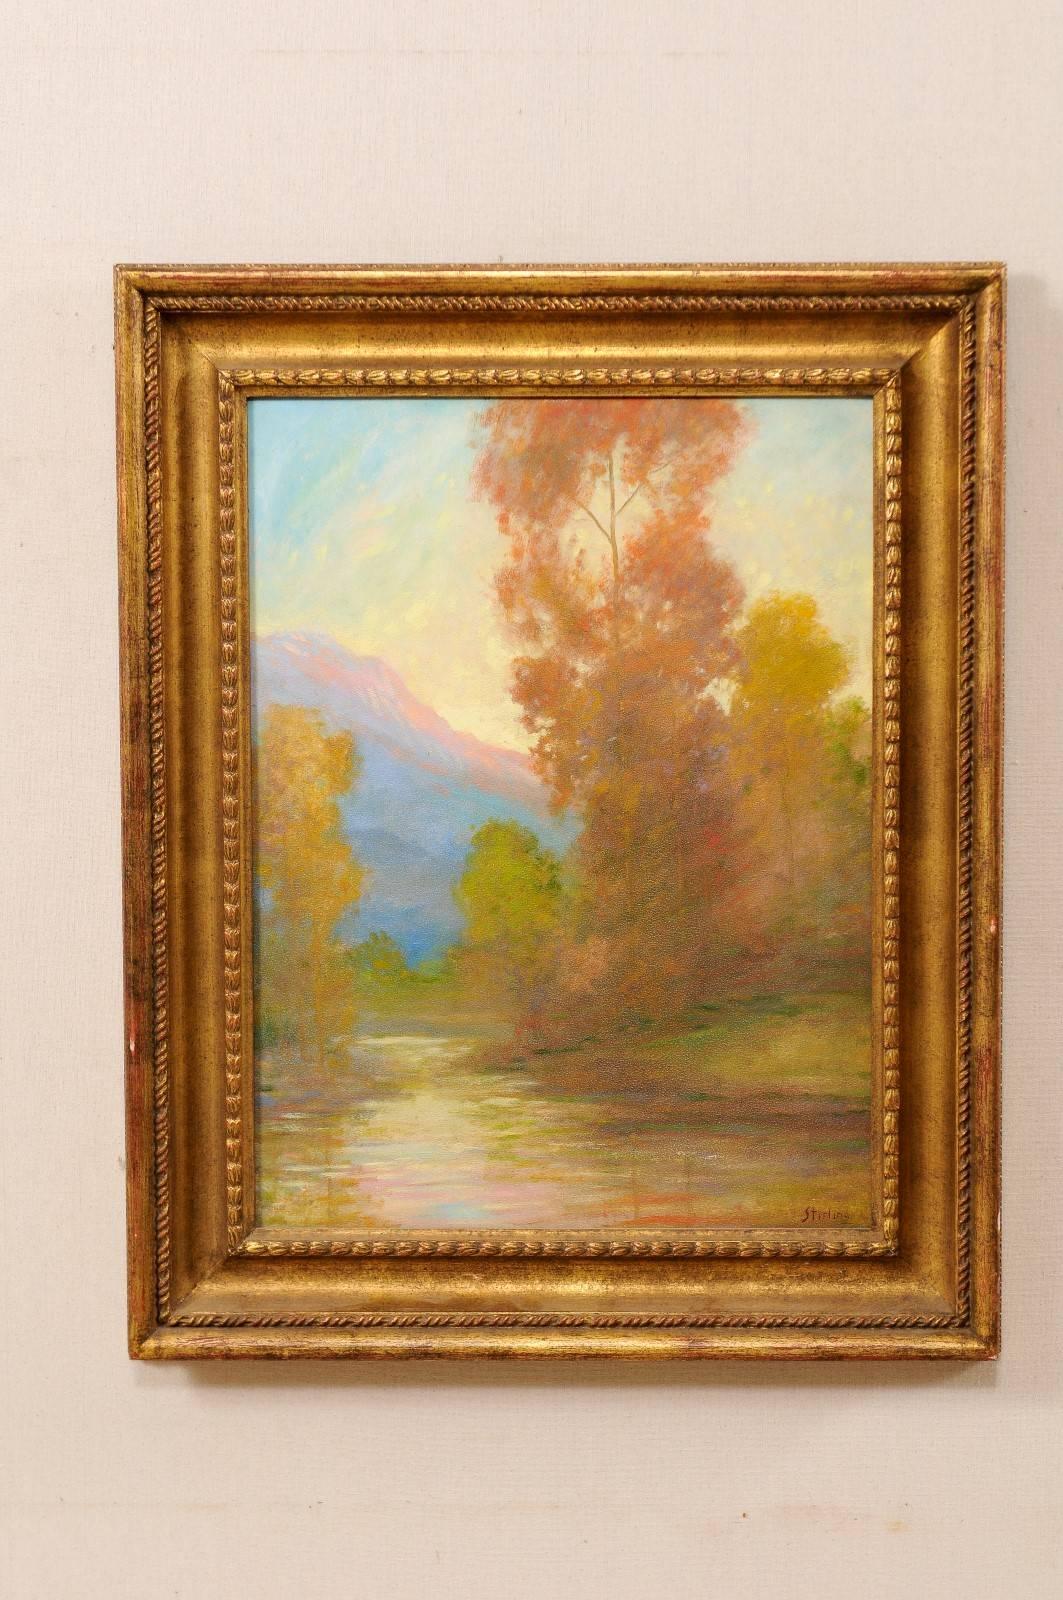 A David Sterling, American artist (1887-1971) landscape oil painting in frame. This is a romantic depiction of a water source surrounded by autumn trees and mountain in the distance. This painting is within a gold wood carved frame. Signed